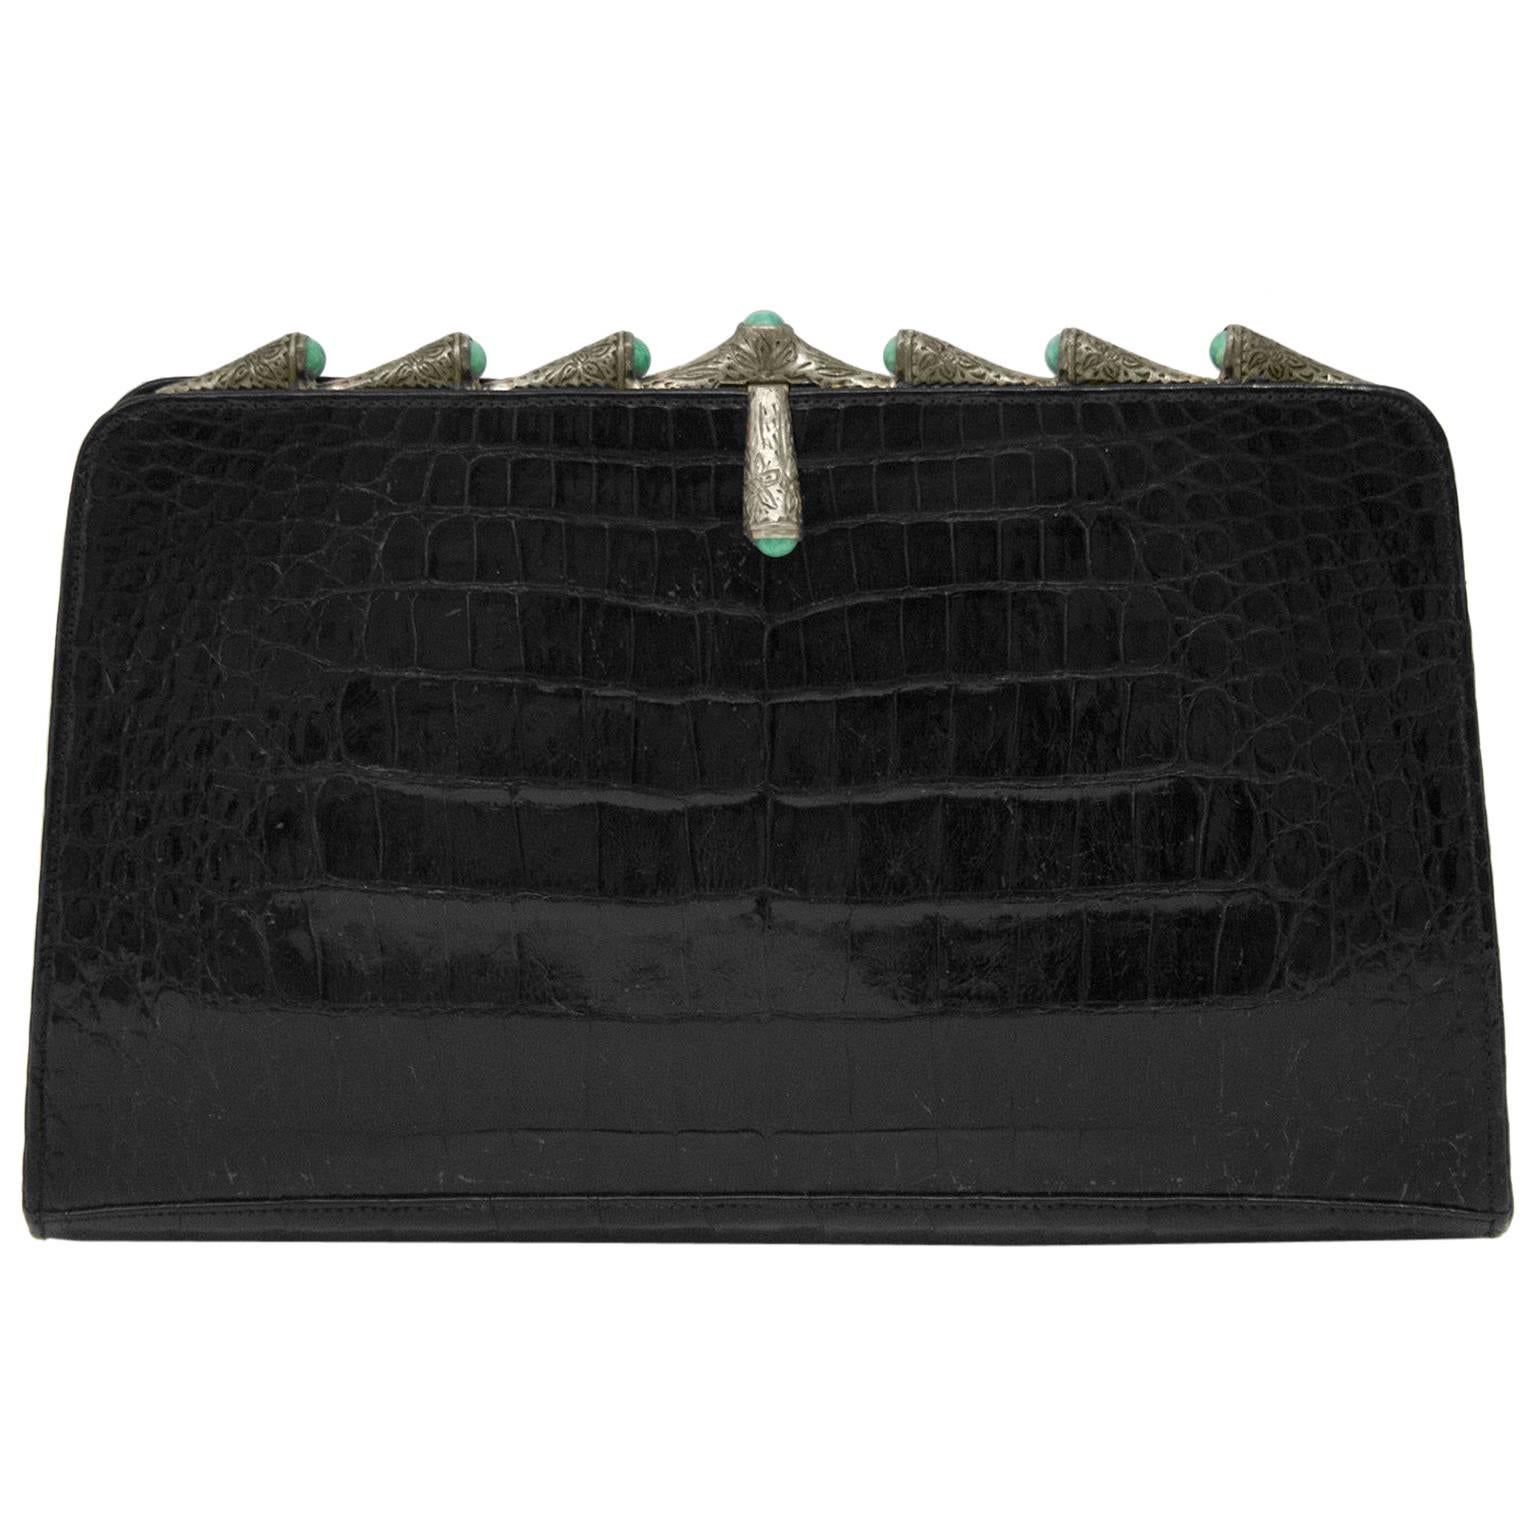 1950s Black Croc Evening Clutch with Silver and Turquoise Details